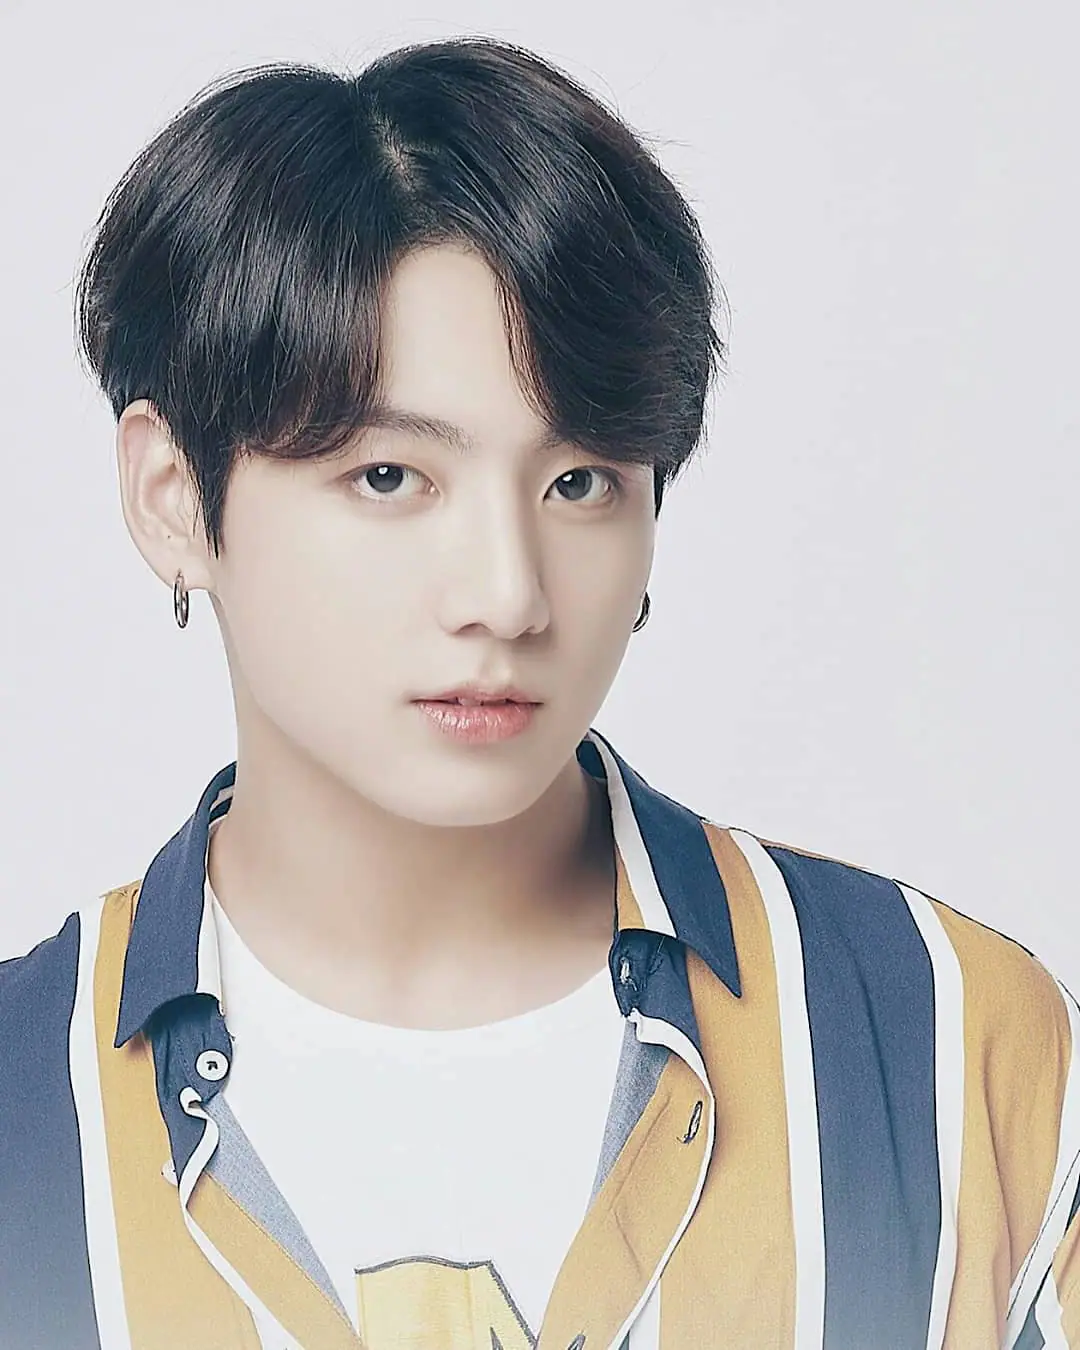 Bts'S Jung Kook Shatters Records With Solo Debut 'Seven' 1